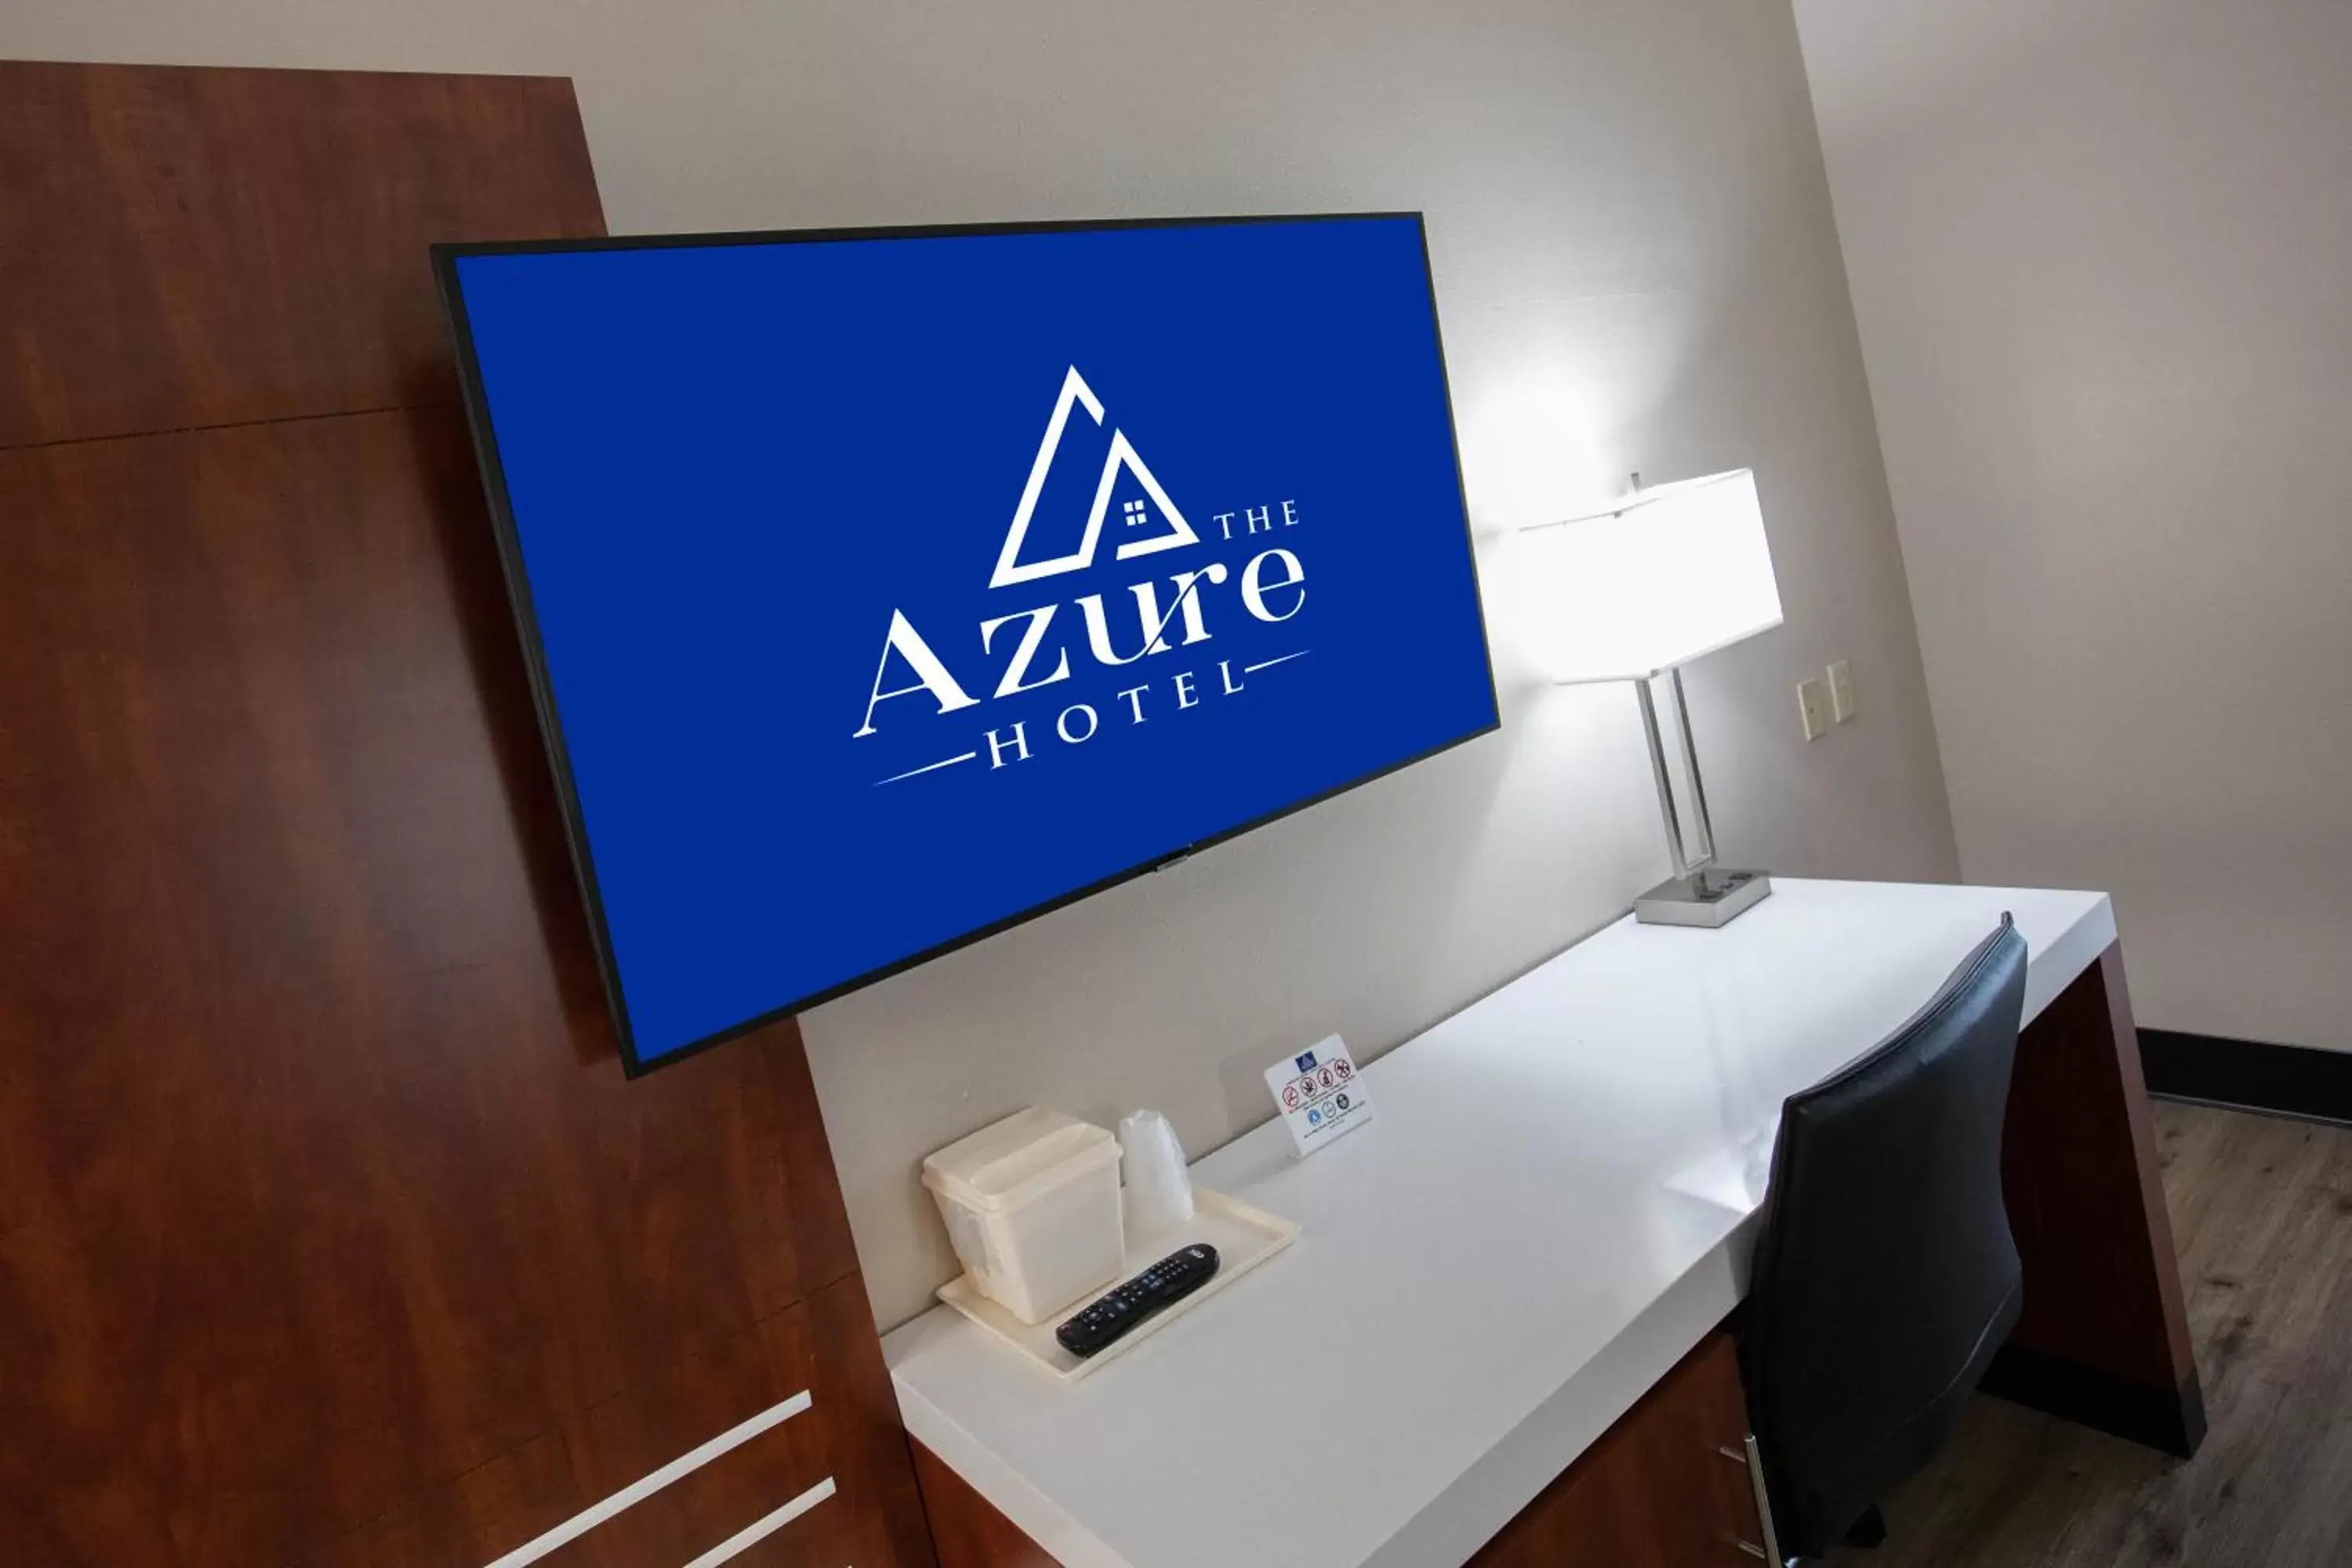 The Azure Hotel